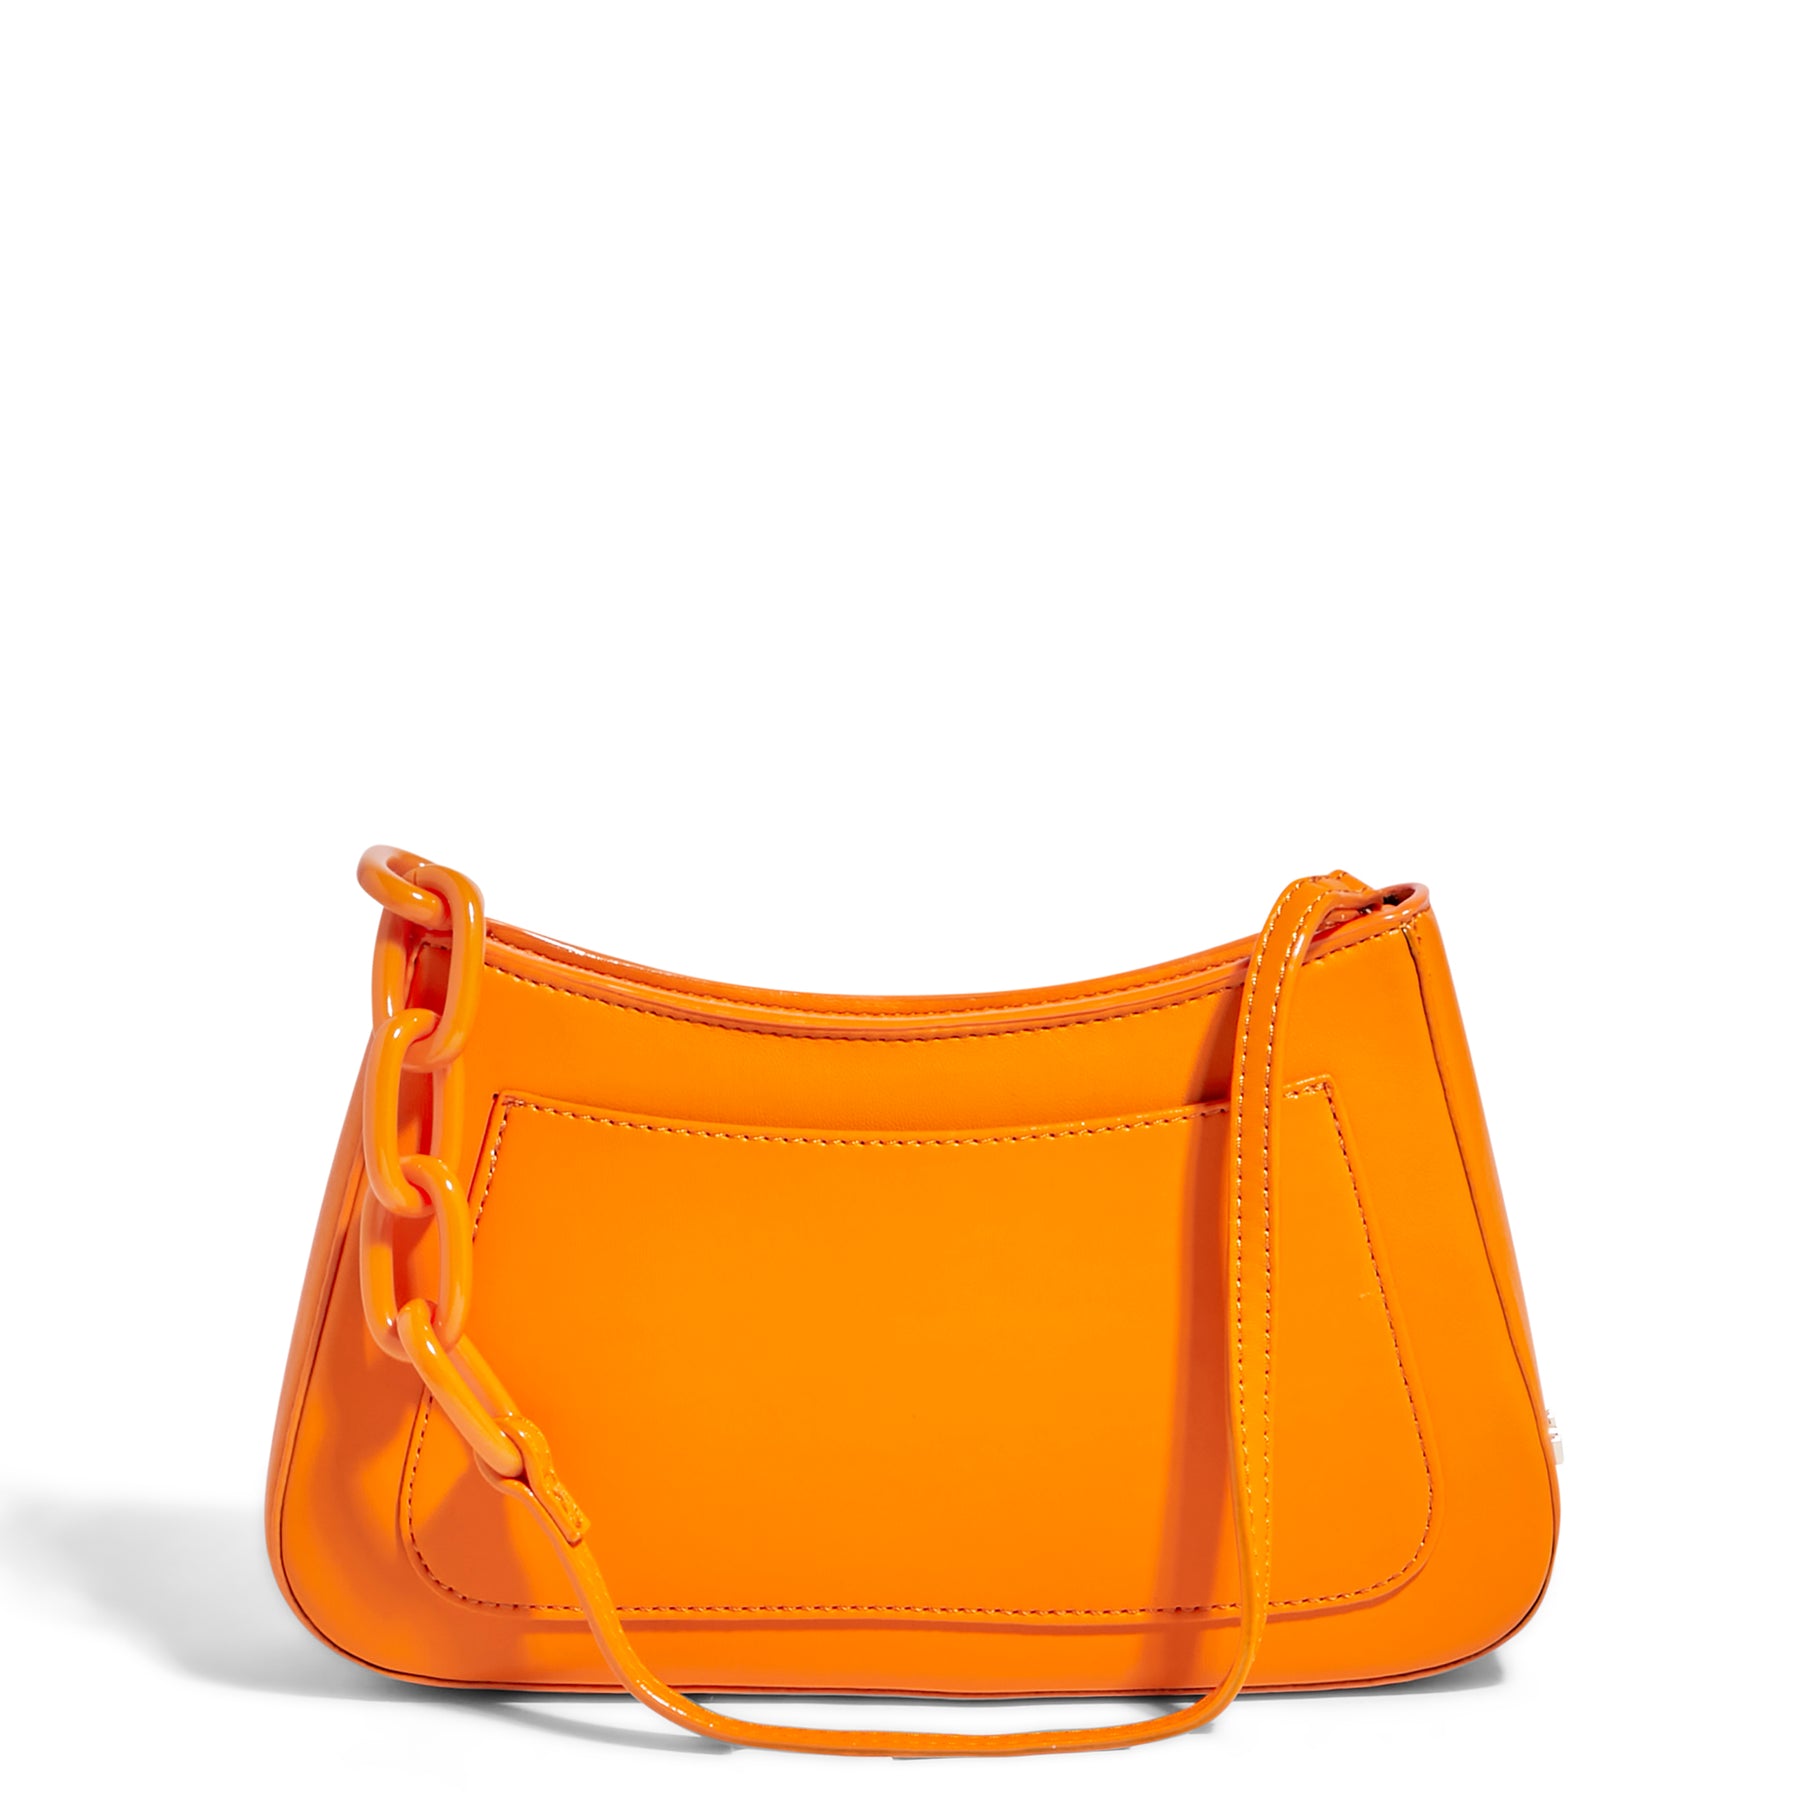 House Of Want | Newbie Baguette Orange – House of Want